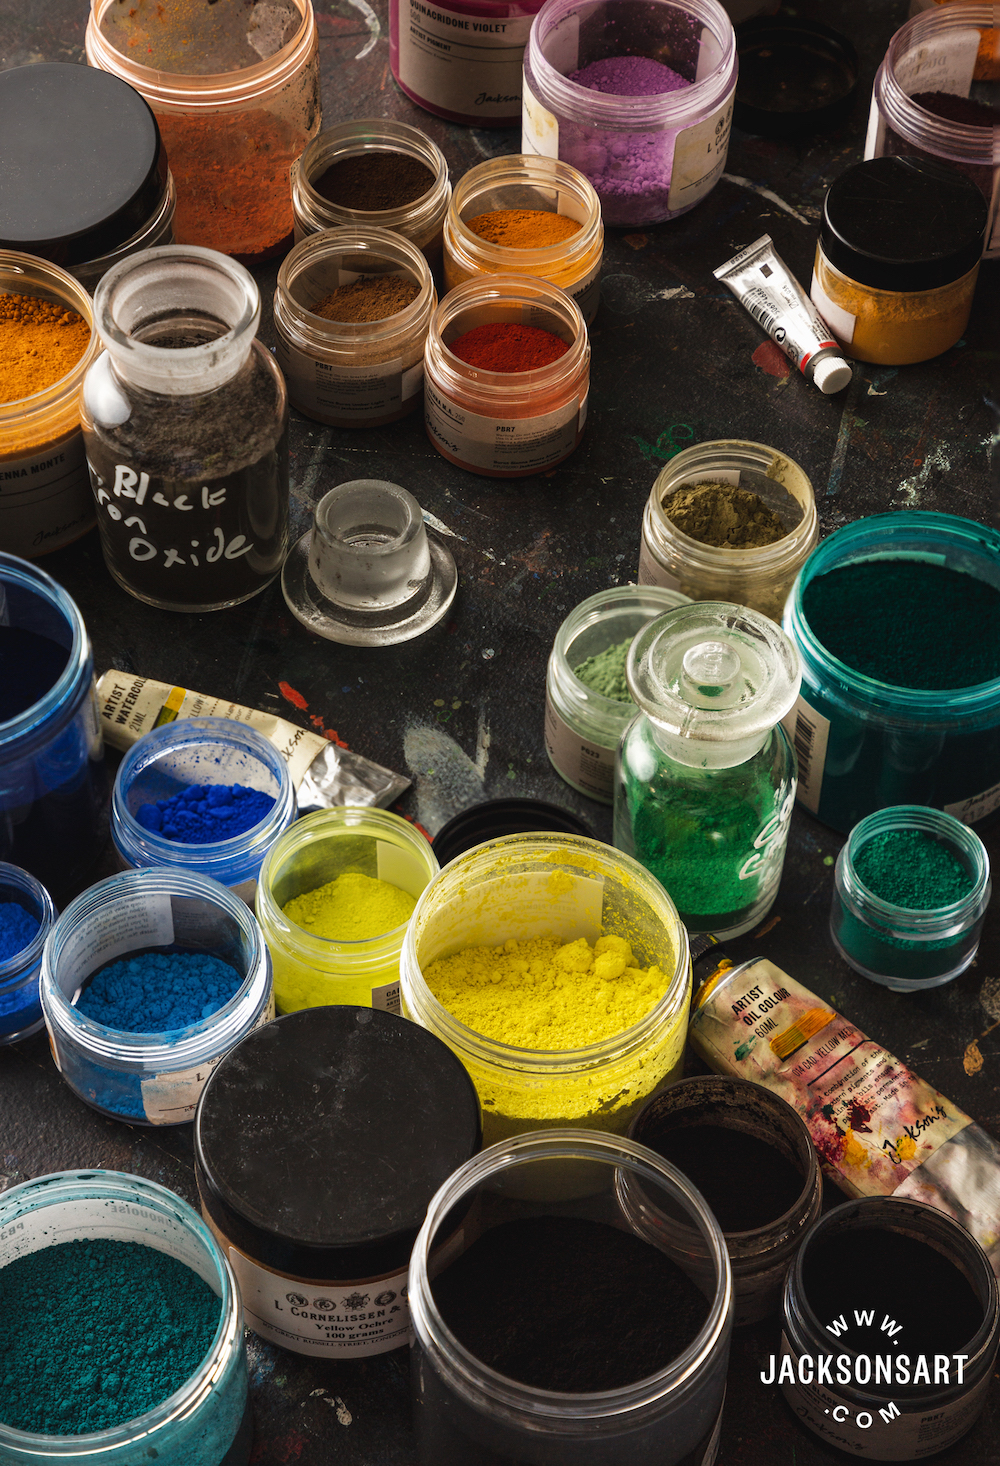 6 Ways You Can Use Your Art Supplies Safely - The Earth Pigments